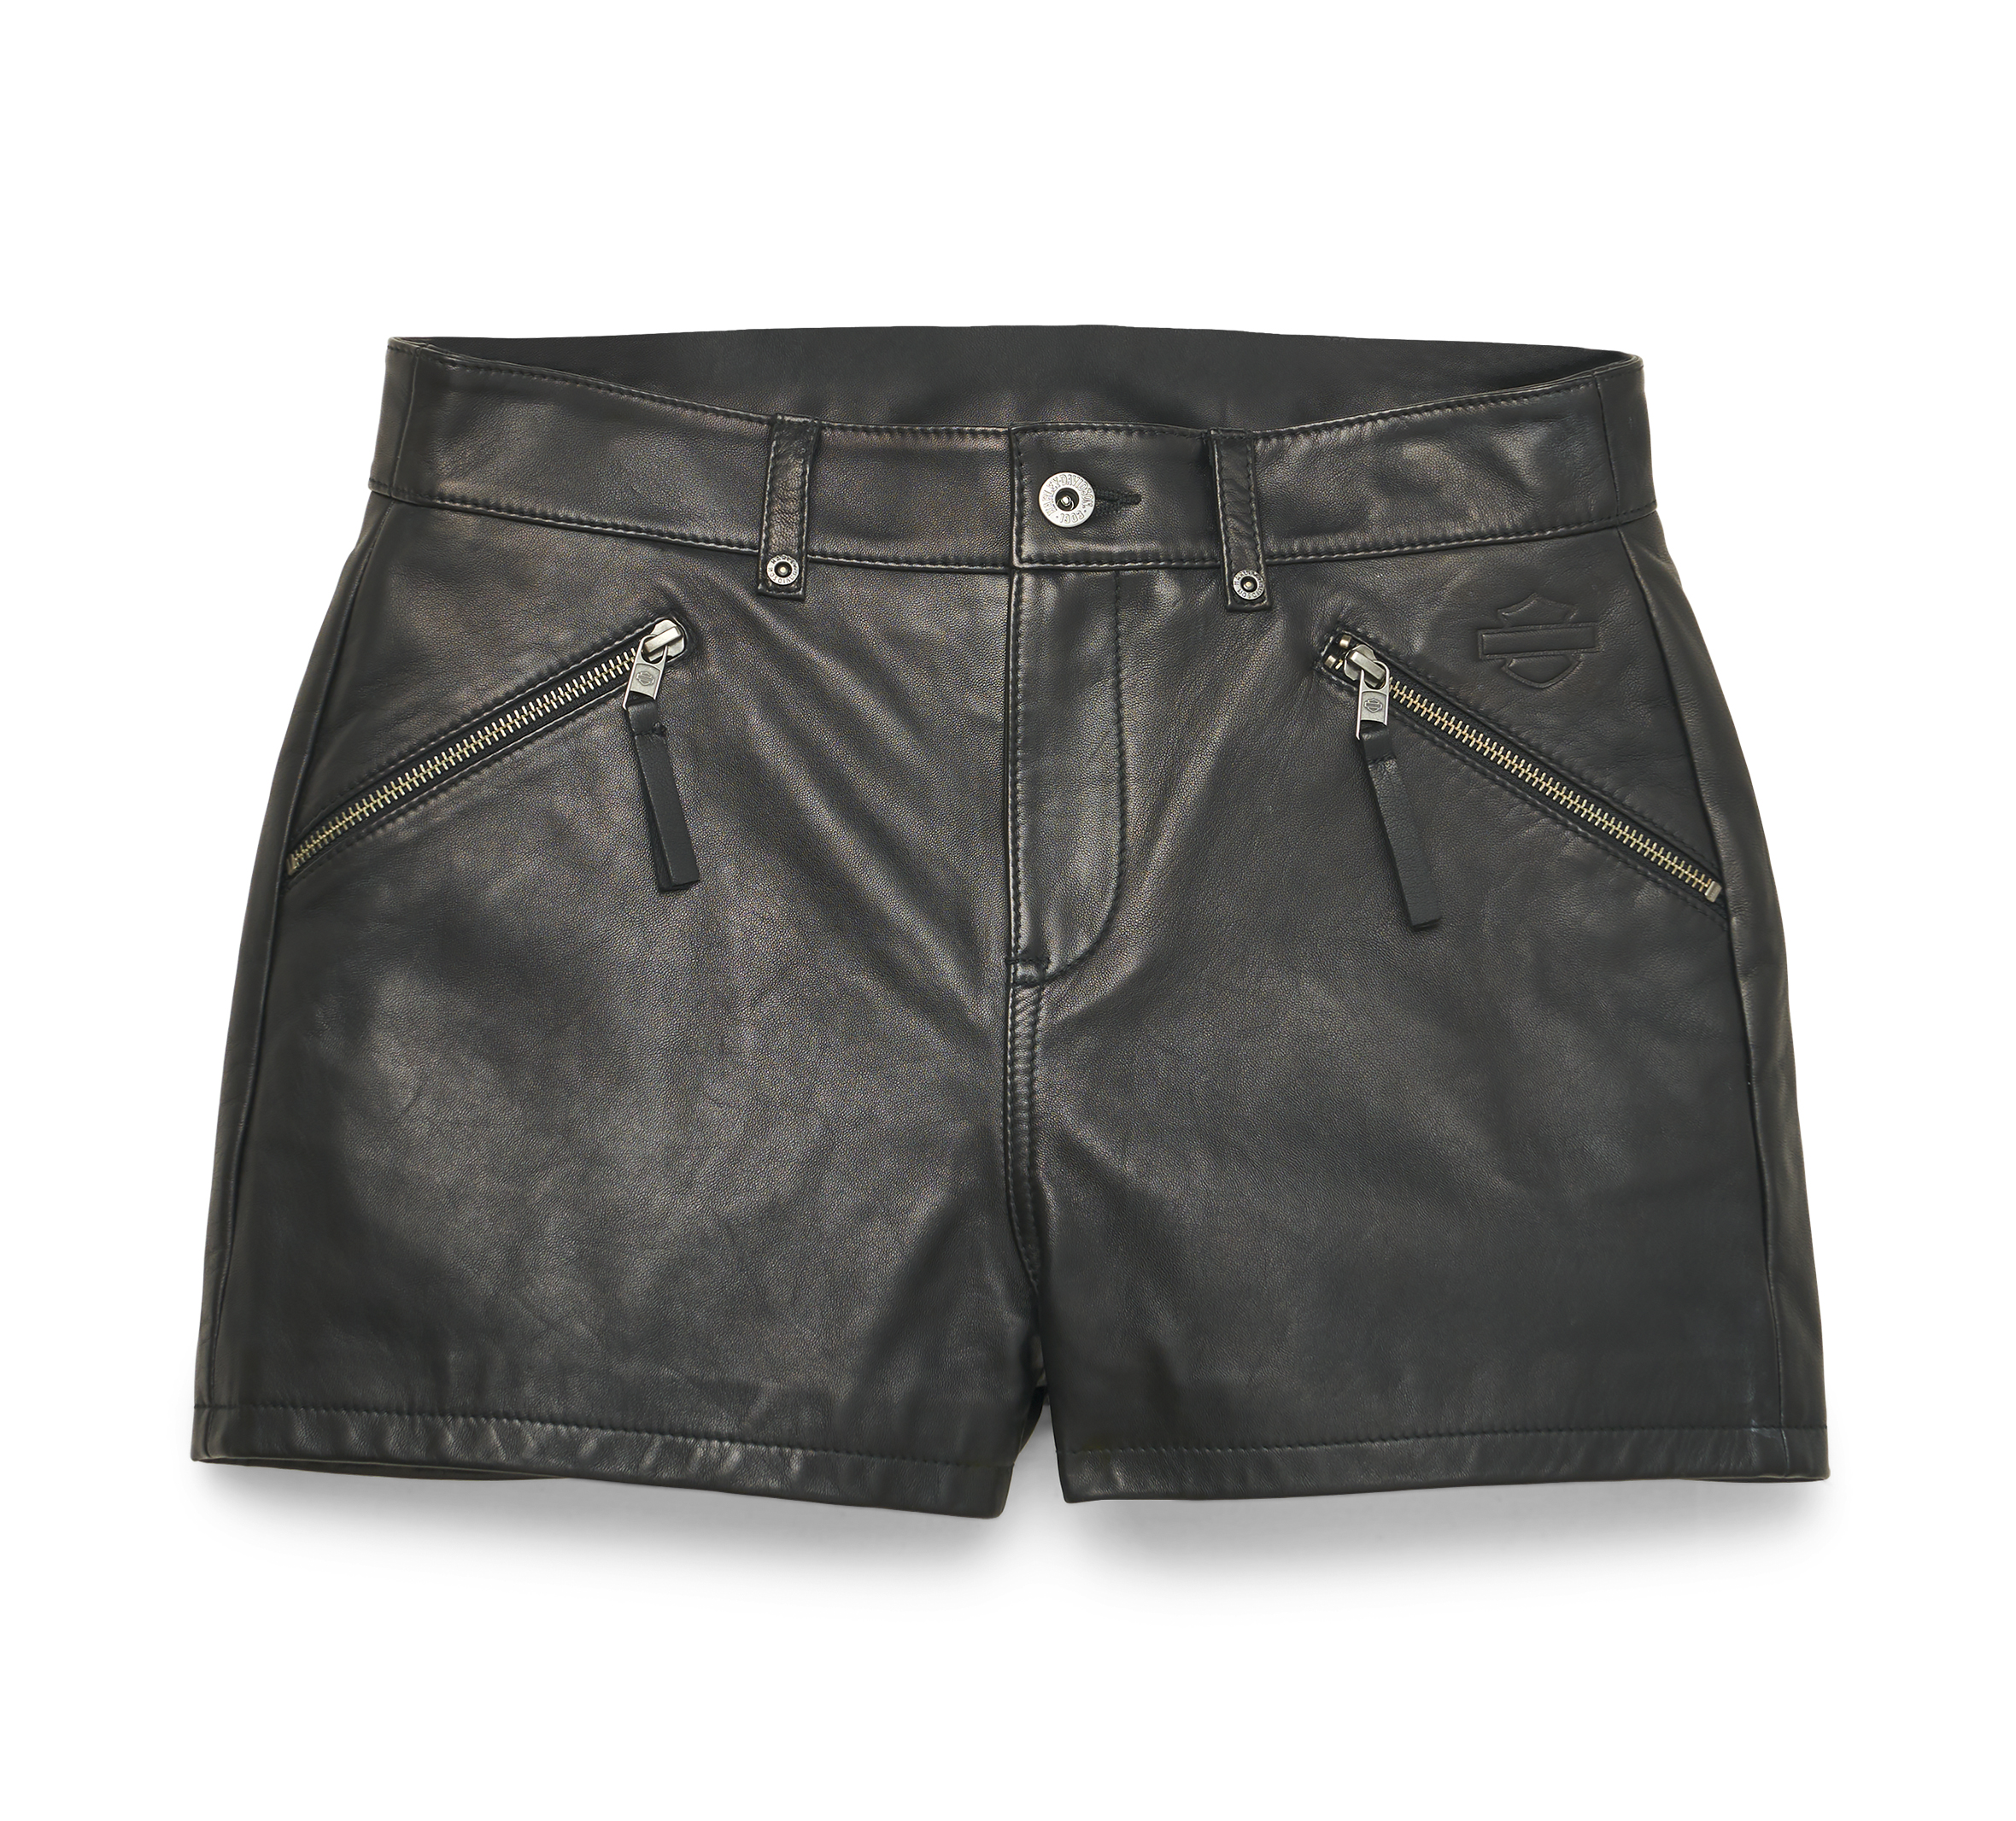 Womens Leather Shorts